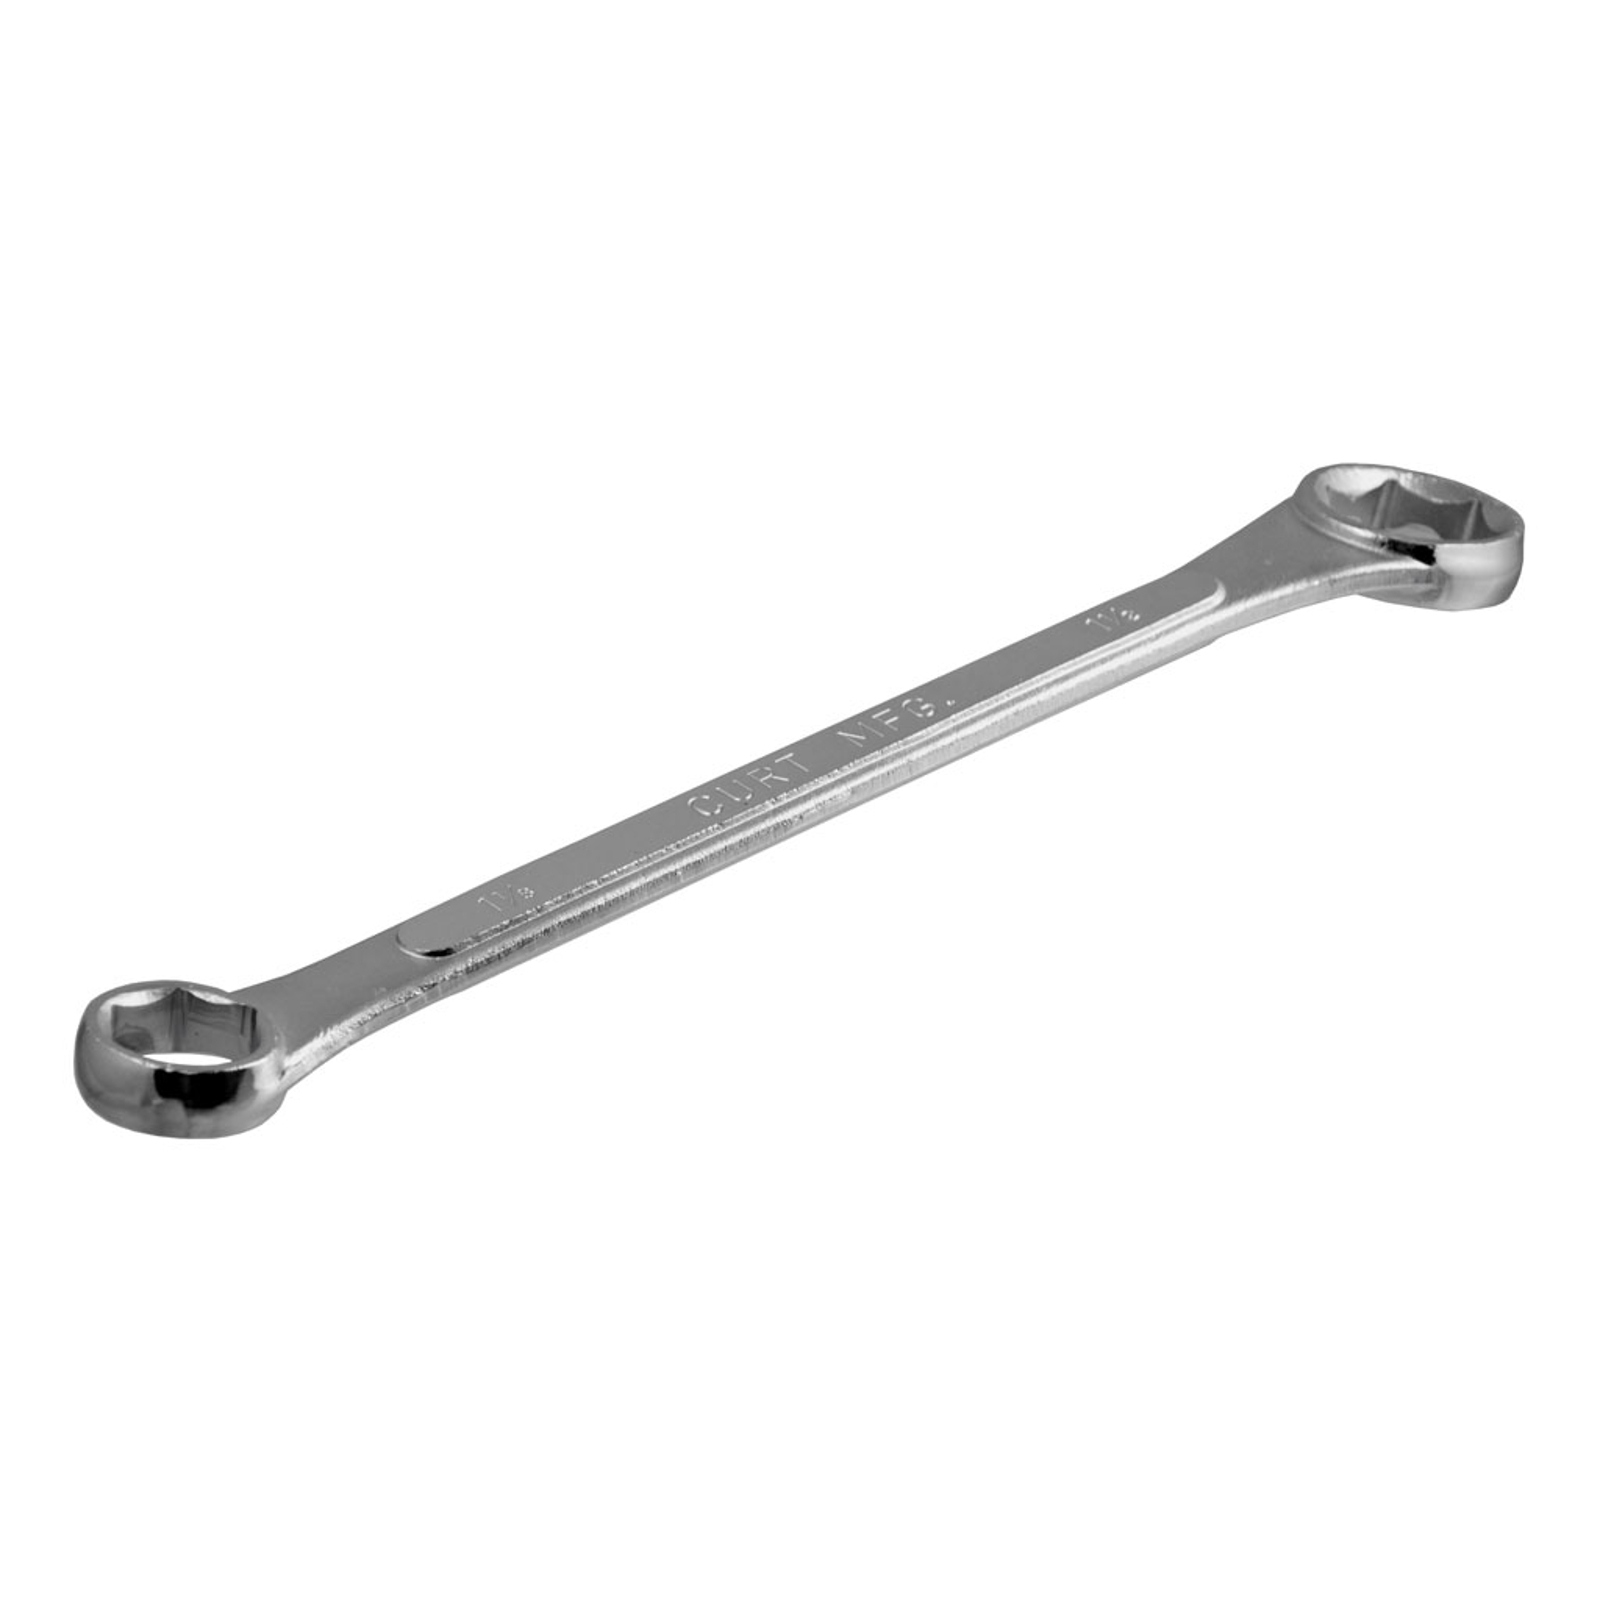 Hitch Ball Nut Wrench- 6 Point Hex- Use W/ 3/4" & 1" Shank Balls- 1-1/8" & 1-1/2" Ends